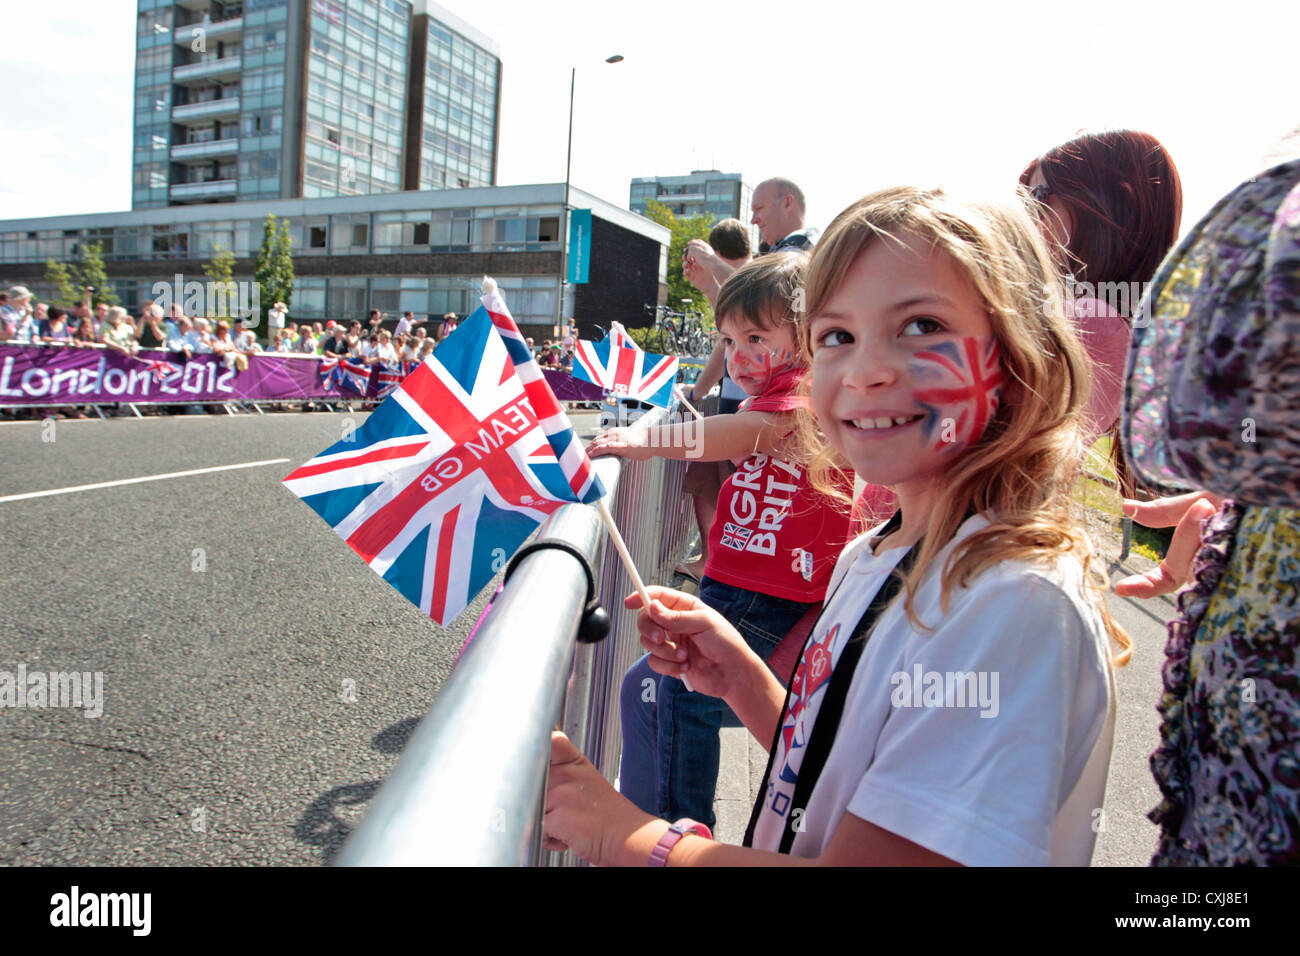 Supporters at the 2012 London Olympics men's cycling road race Stock Photo